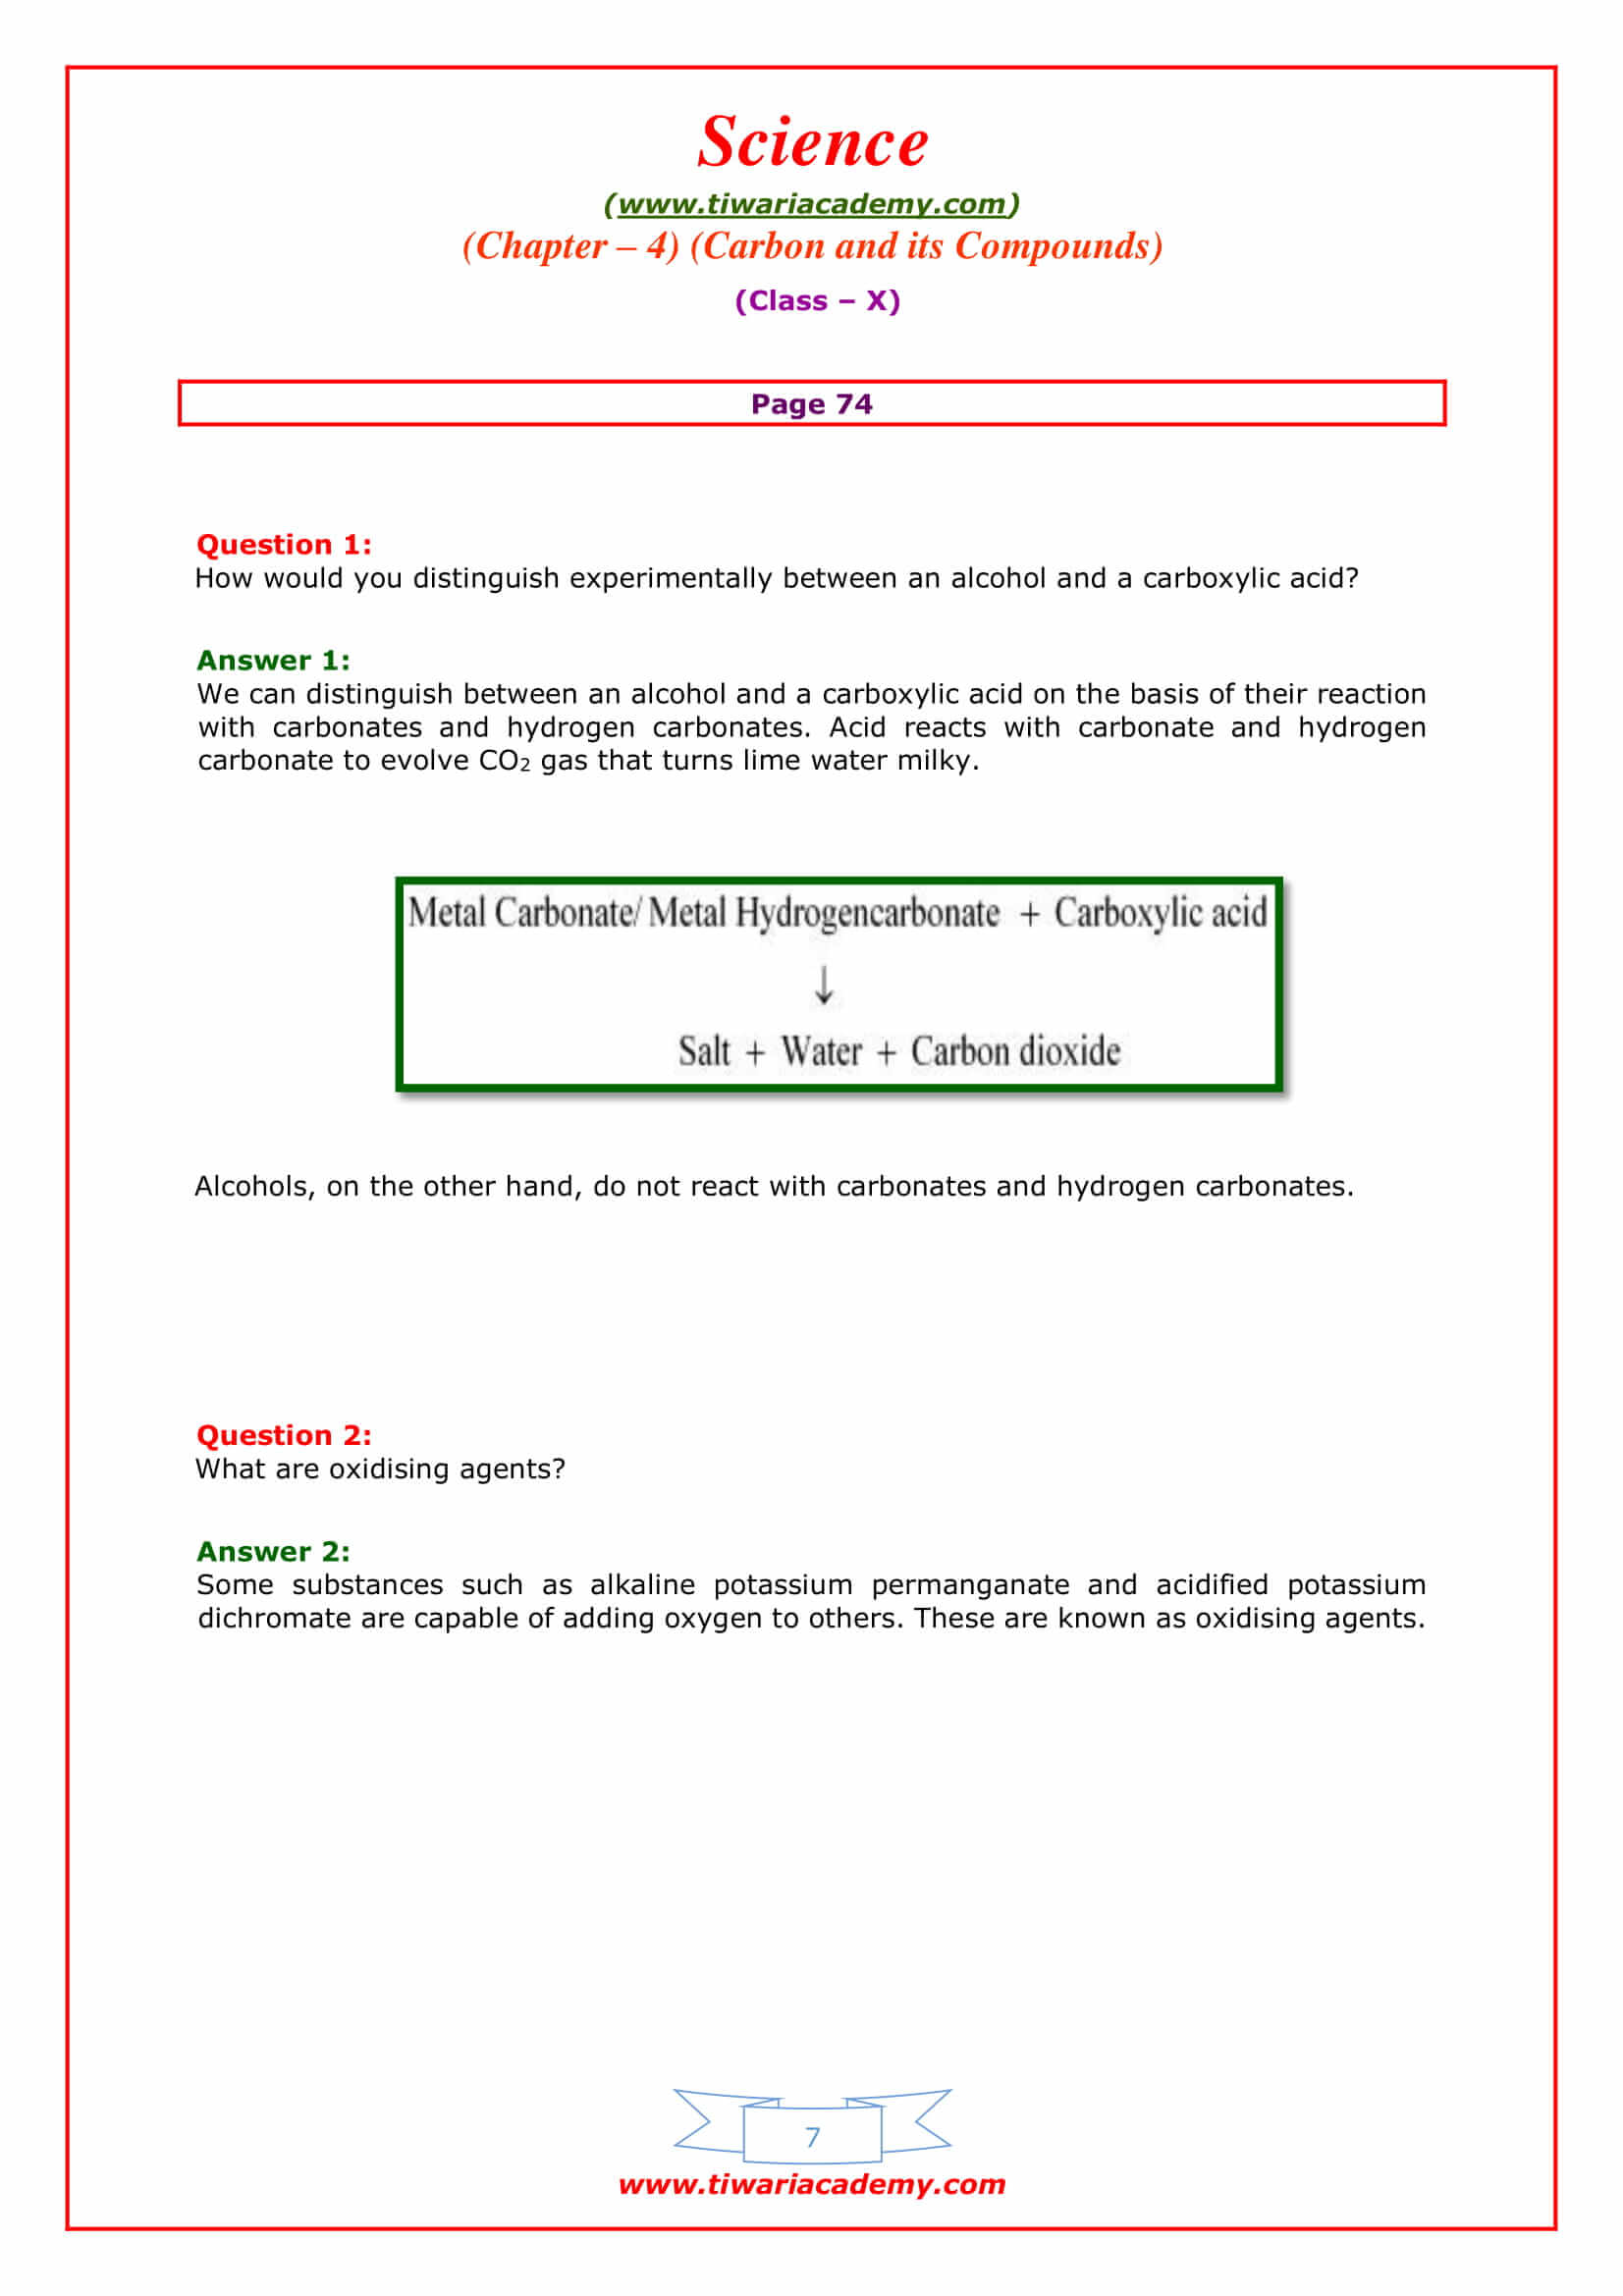 NCERT Solutions for Class 10 Science Chapter 4 page 74